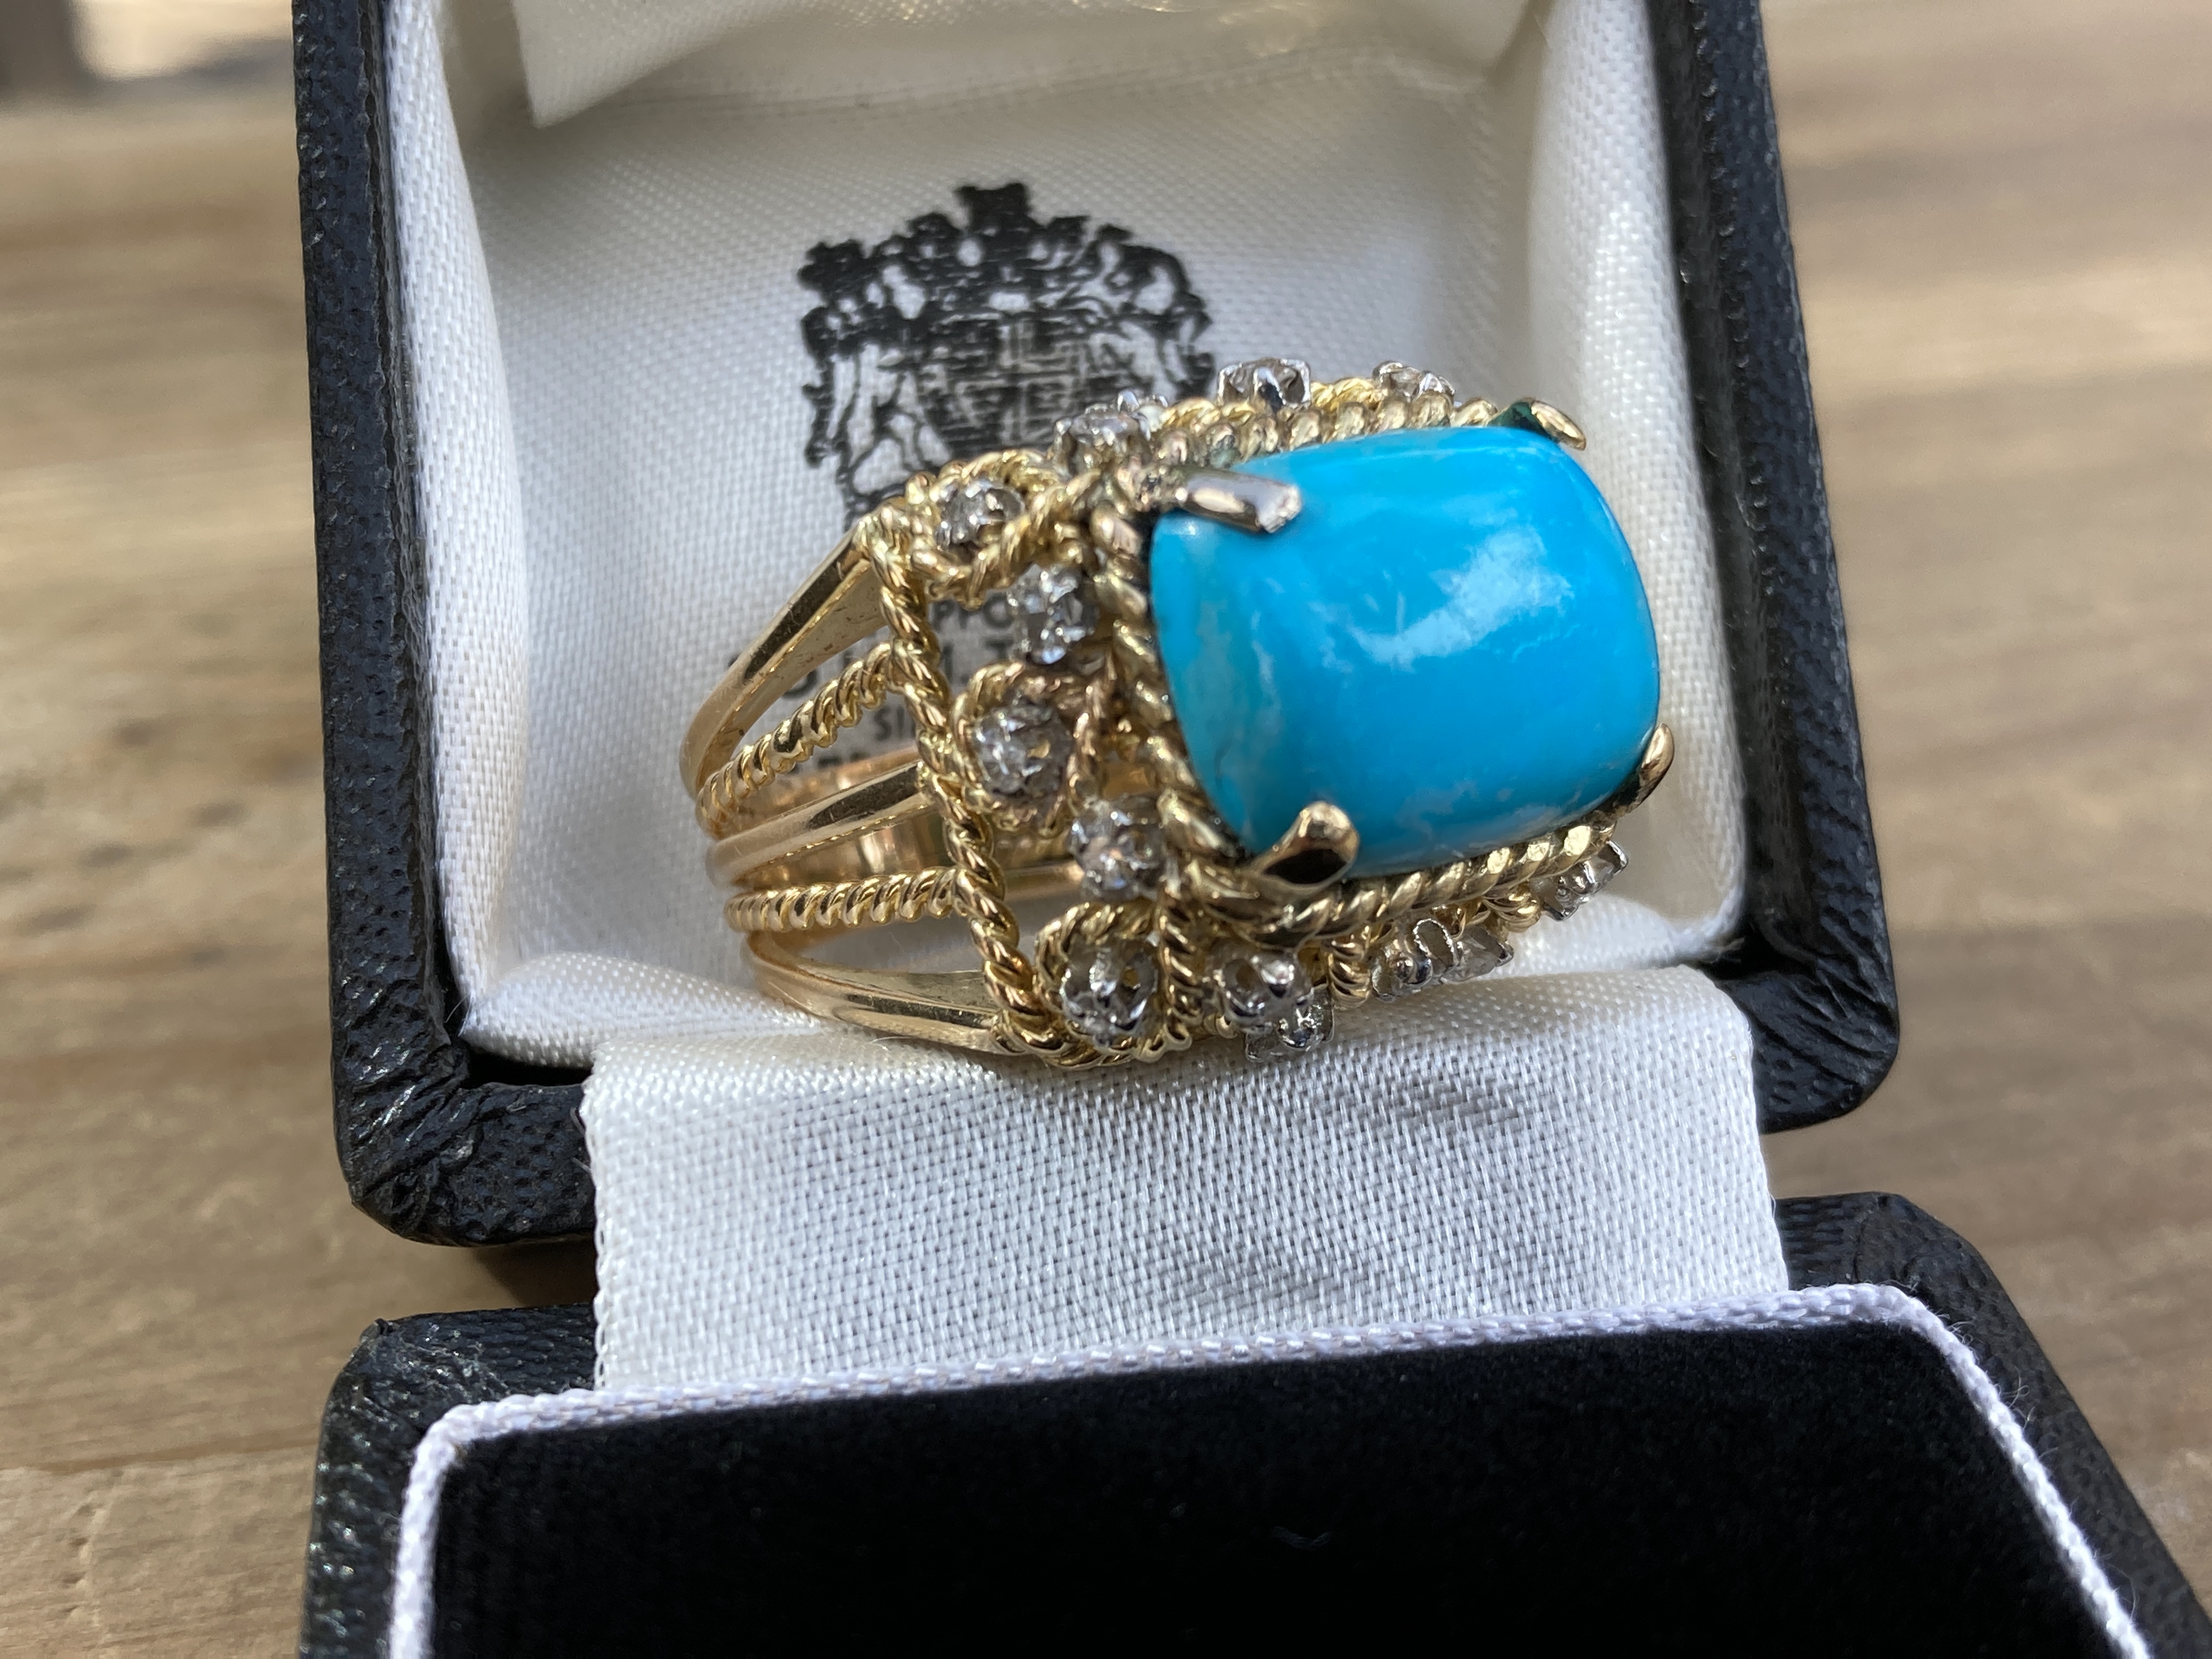 19G 18CT YELLOW GOLD TURQUOISE & DIAMOND COCKTAIL RING - Image 3 of 6